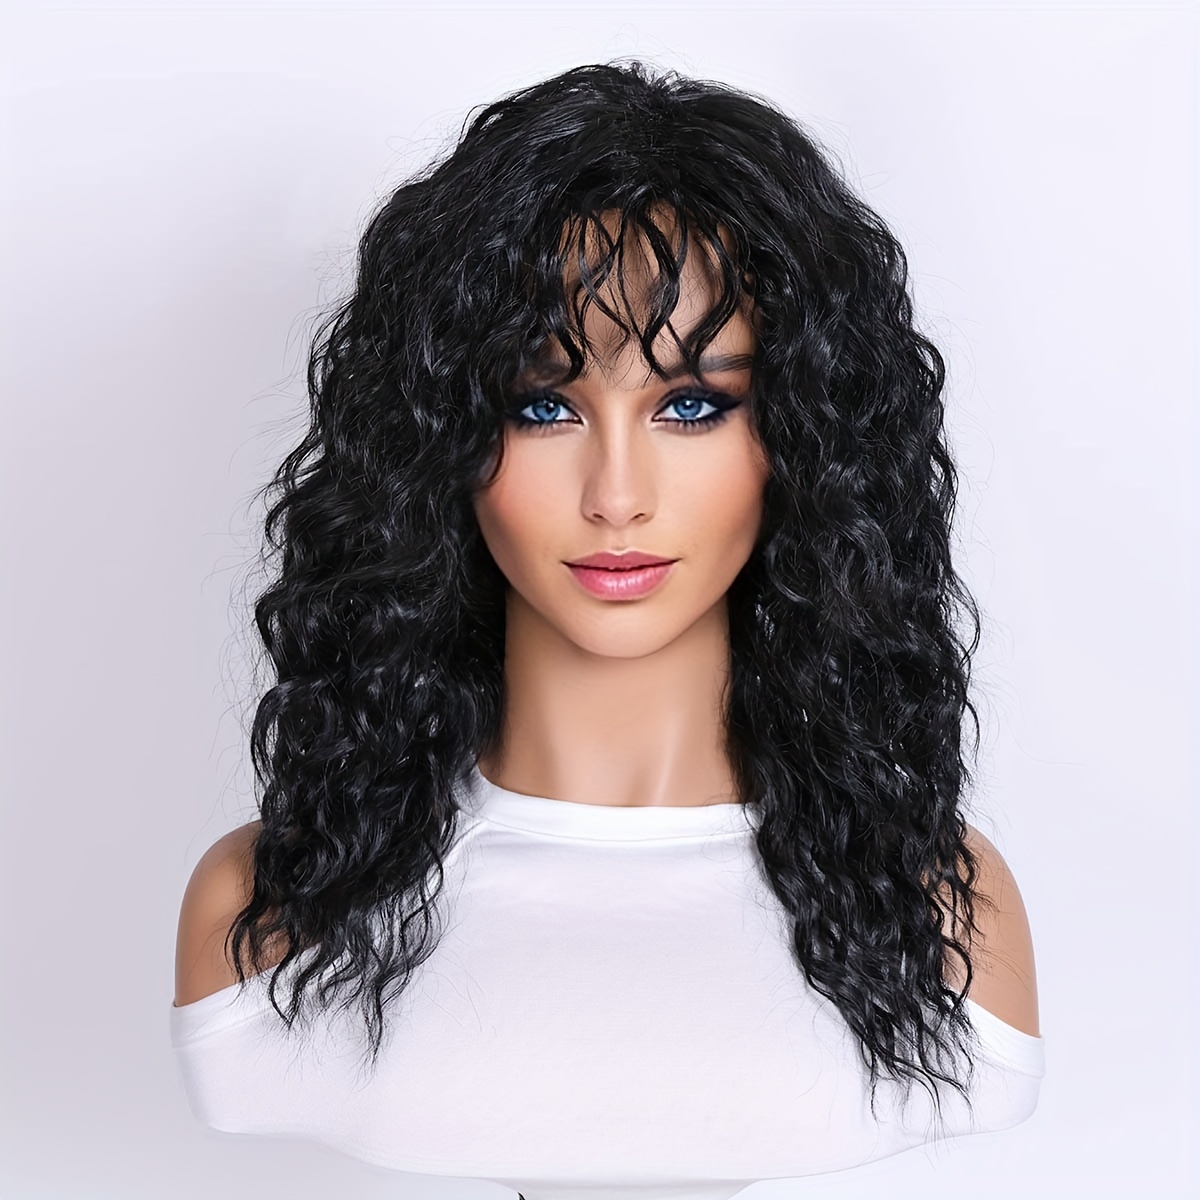 

Chic 18-inch Long Curly Wig With Bangs For Women - Heat Resistant Synthetic Hair In Black, Grey, Or Brown - Perfect For Daily Wear & Halloween Parties